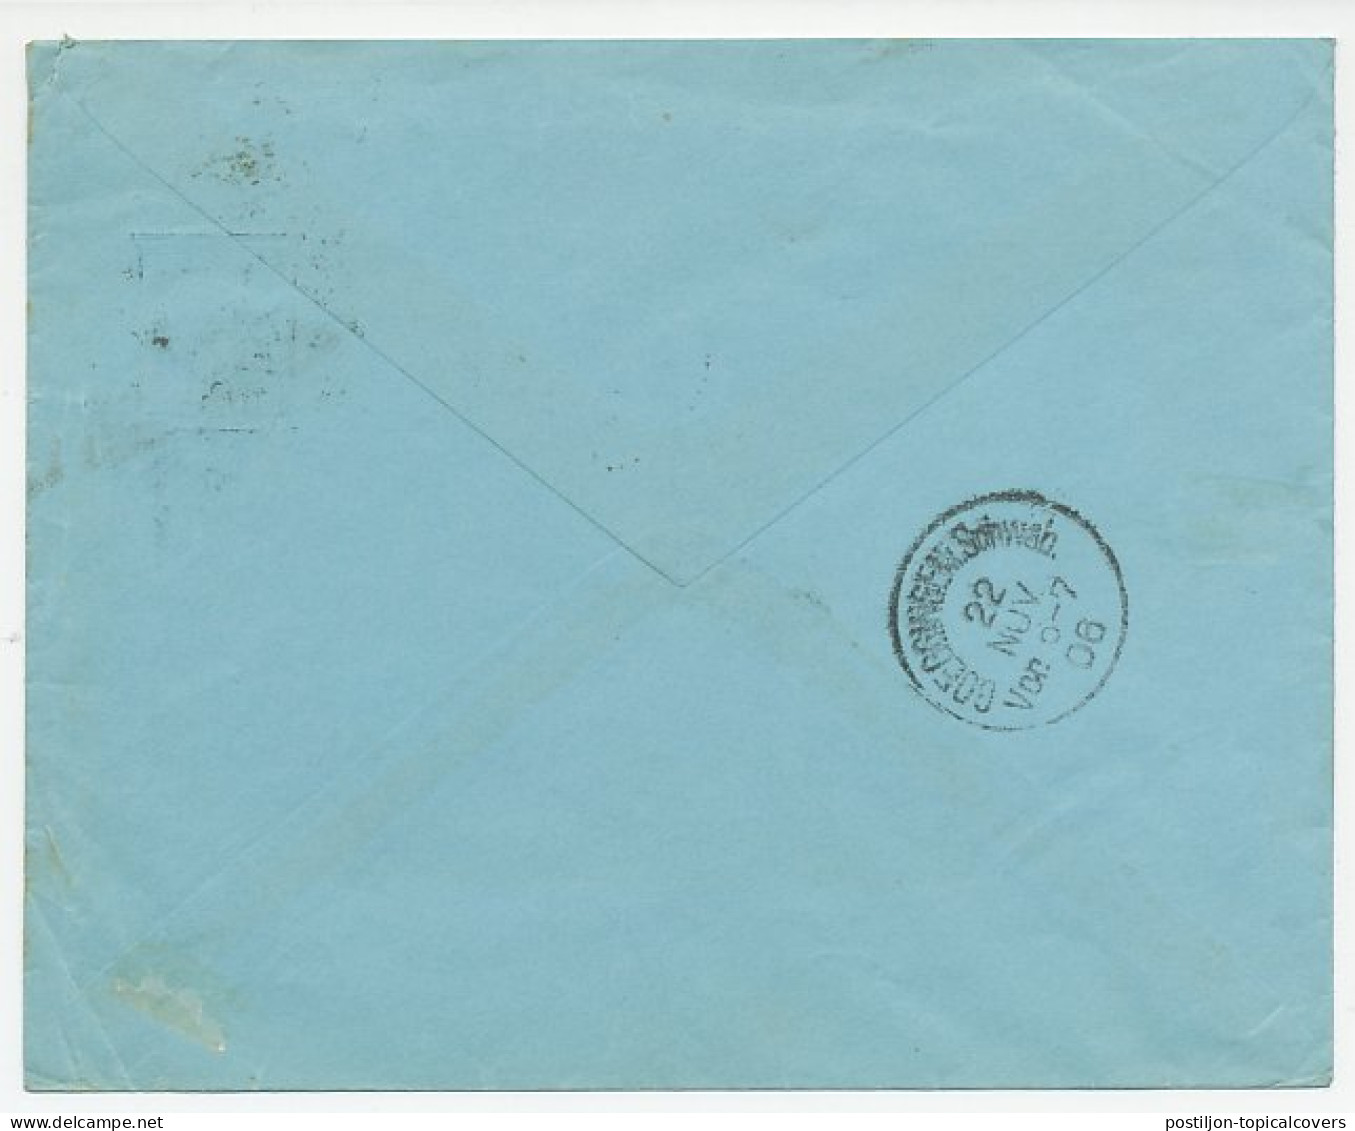 Postal Stationery Austria 1906 - Privately Printed Machine And Metal Goods Factory - Factories & Industries